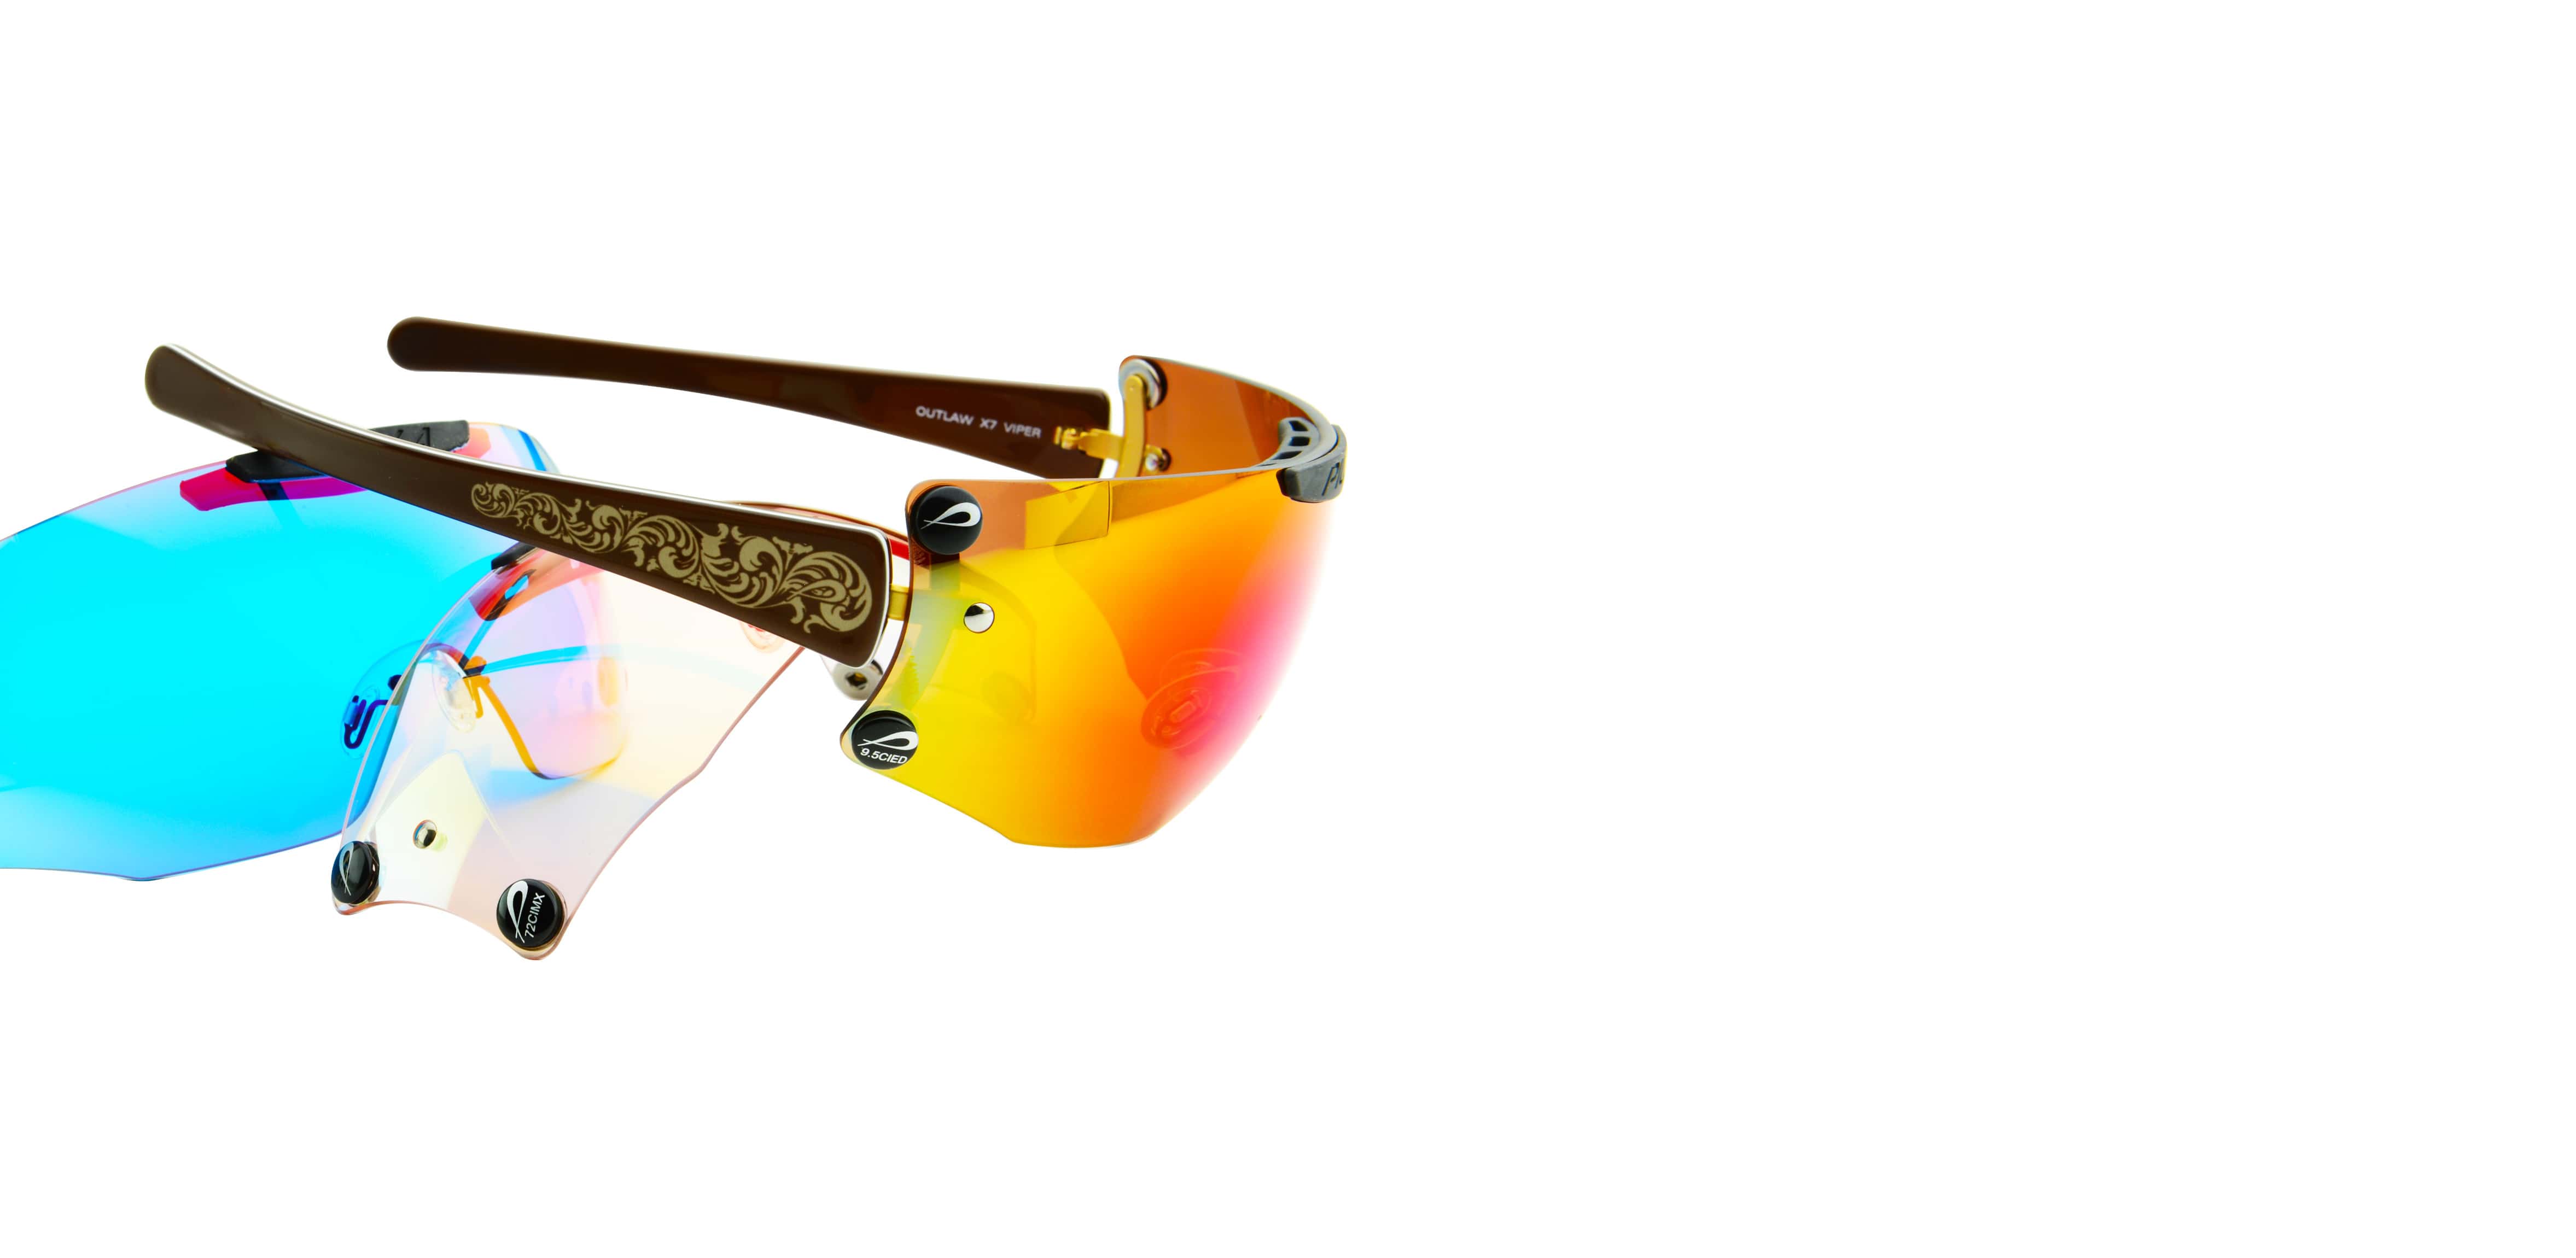 Pilla Sport creates technically superior glasses for shooting sports